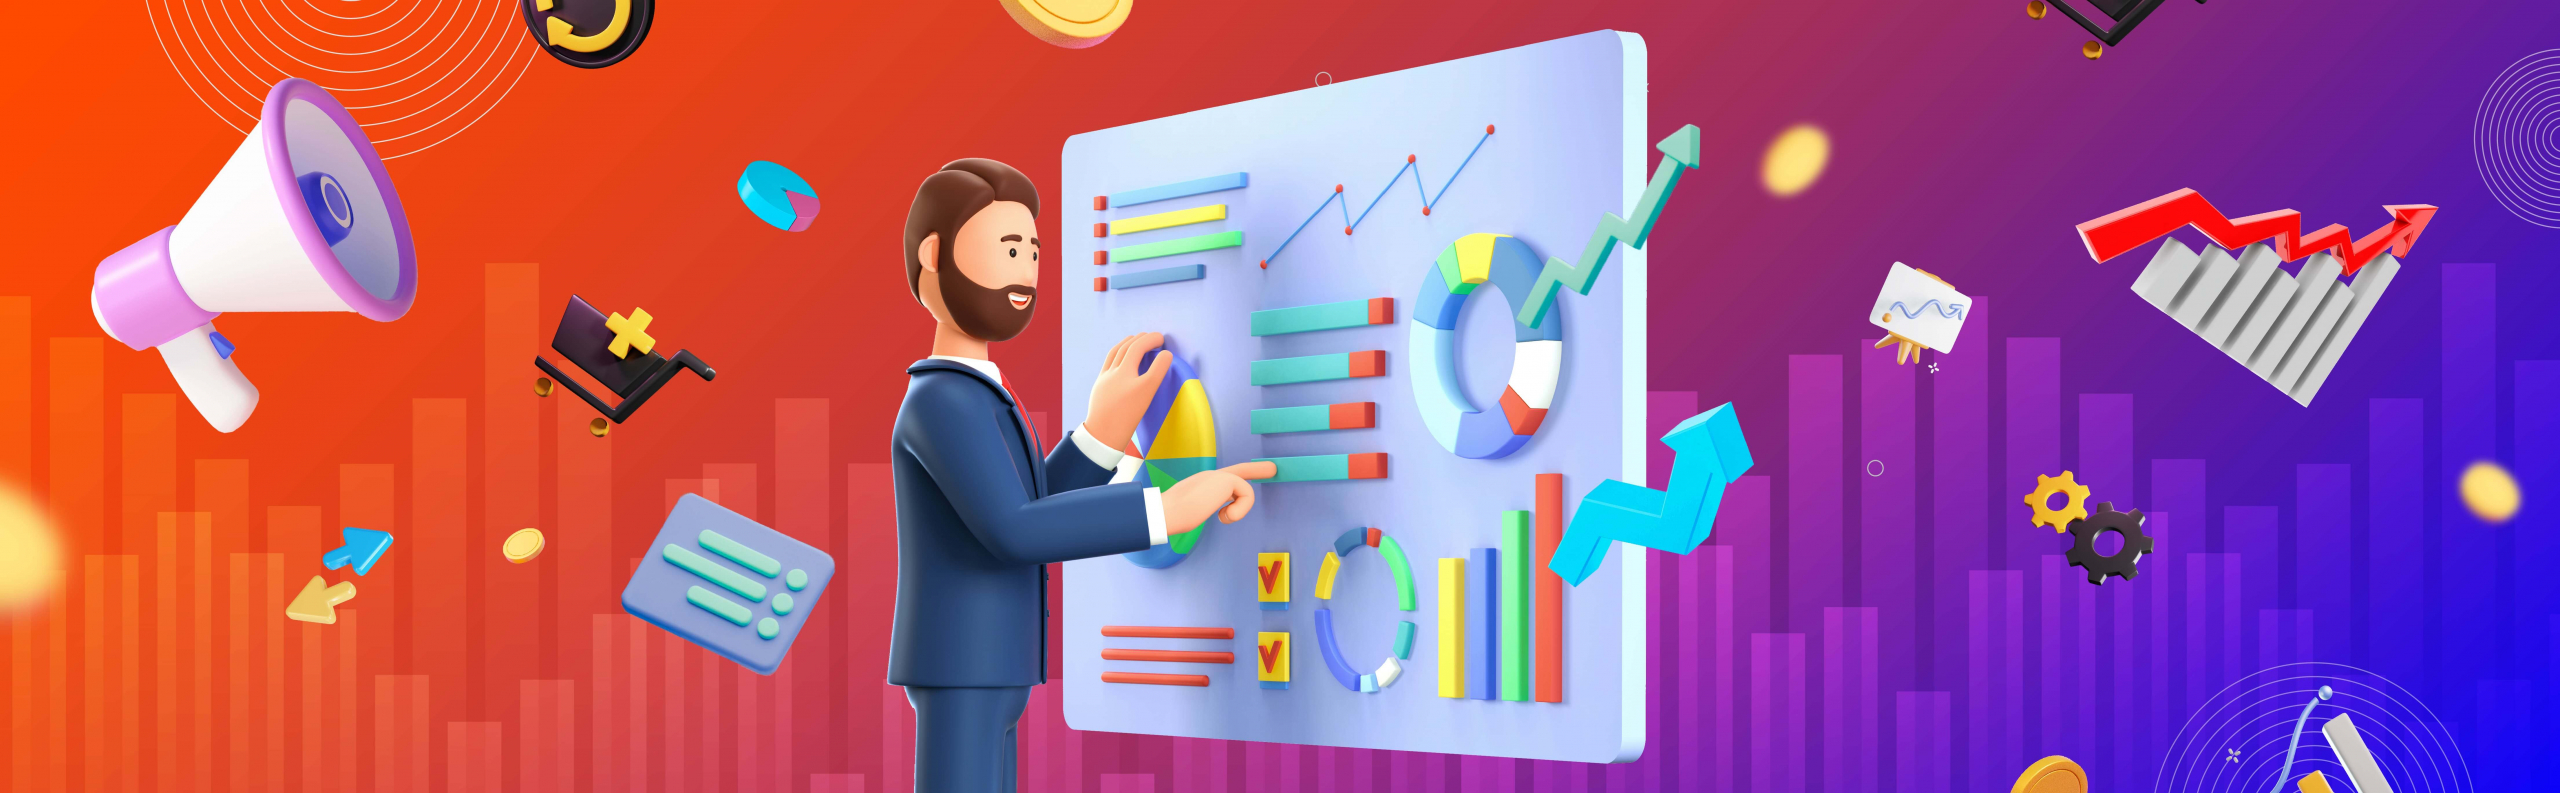 How To Create an Effective Data Dashboard That Tells a Story